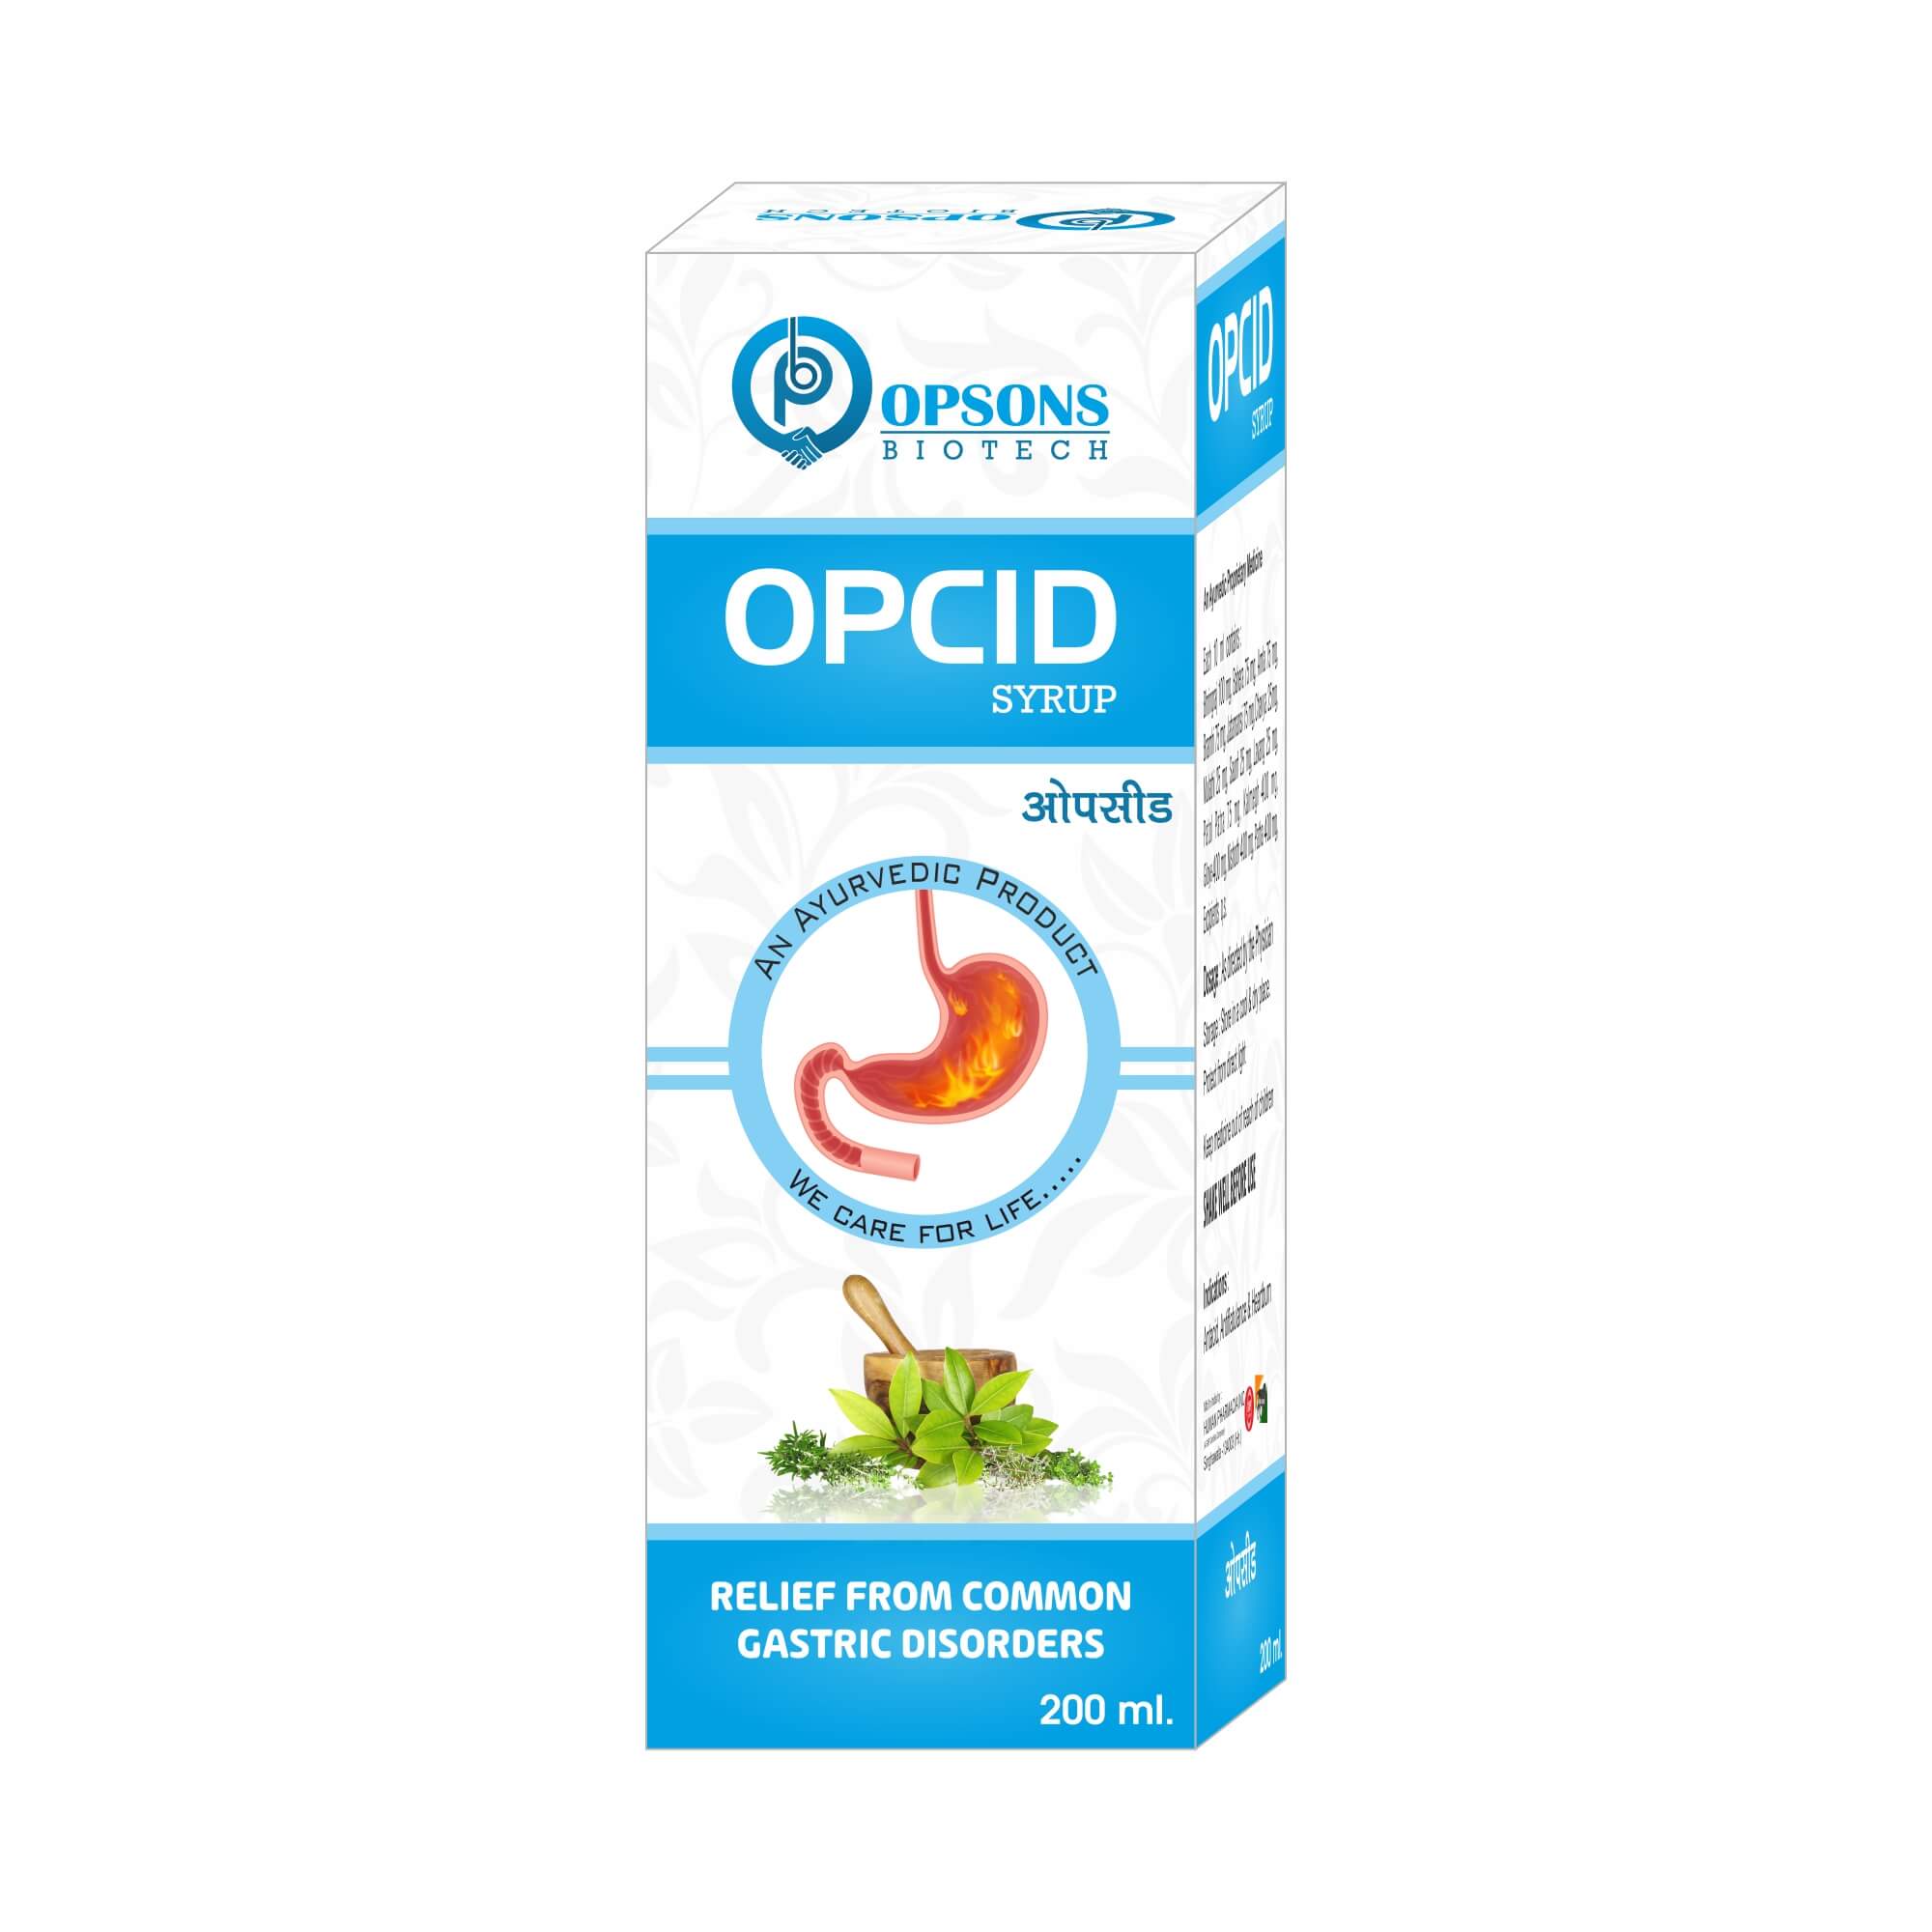 Product Name: OPCID, Compositions of Relief From Common Gastric Disorder  are Relief From Common Gastric Disorder  - Opsons Biotech